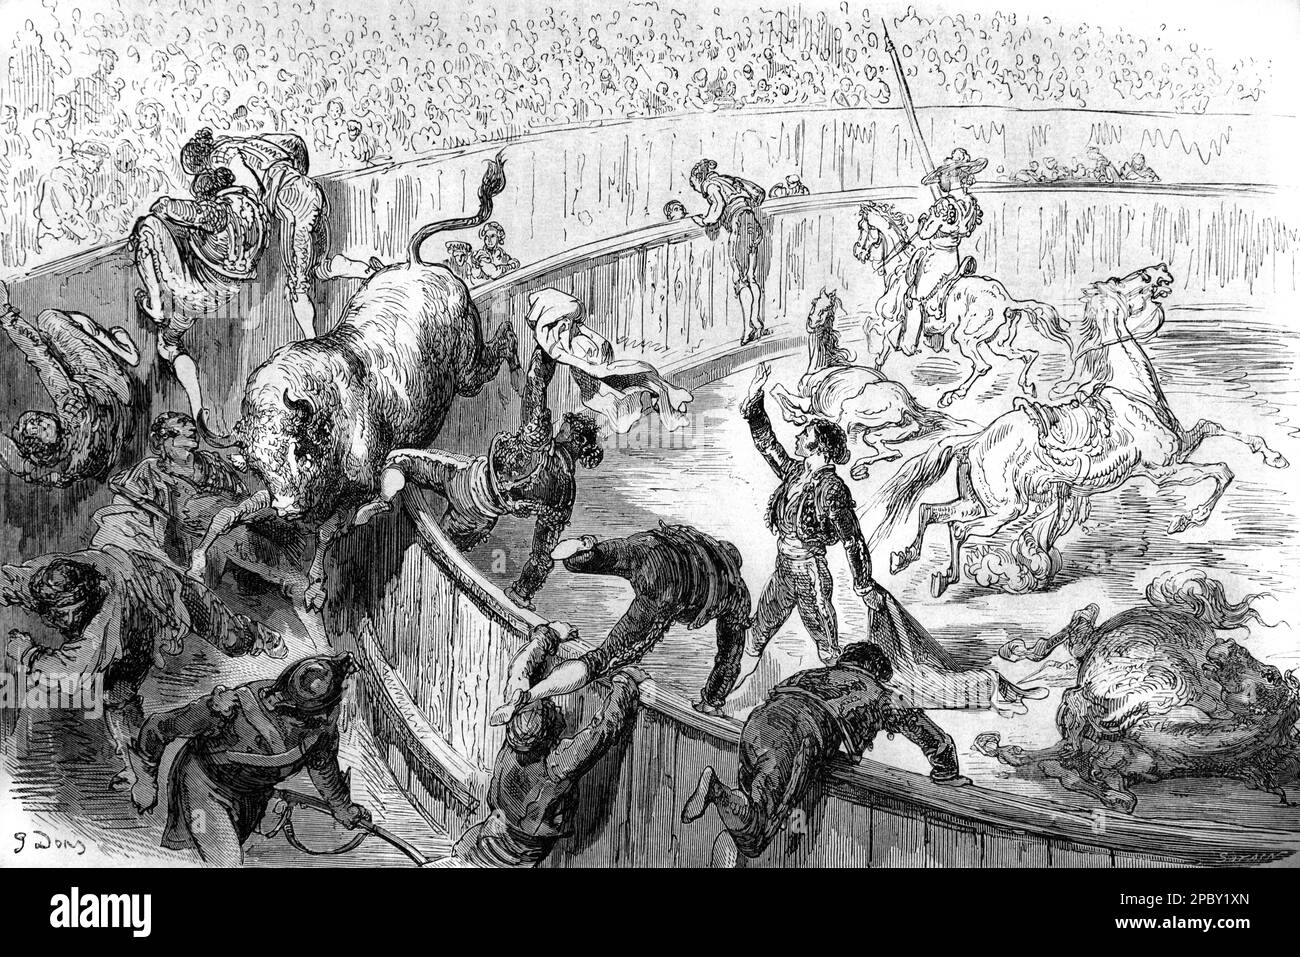 A Bull Breaks through the Barrier during a Spanish Bullfight or Corrida Spain. Vintage or Historic Engraving or Illustration by Gustave Doré 1862 Stock Photo